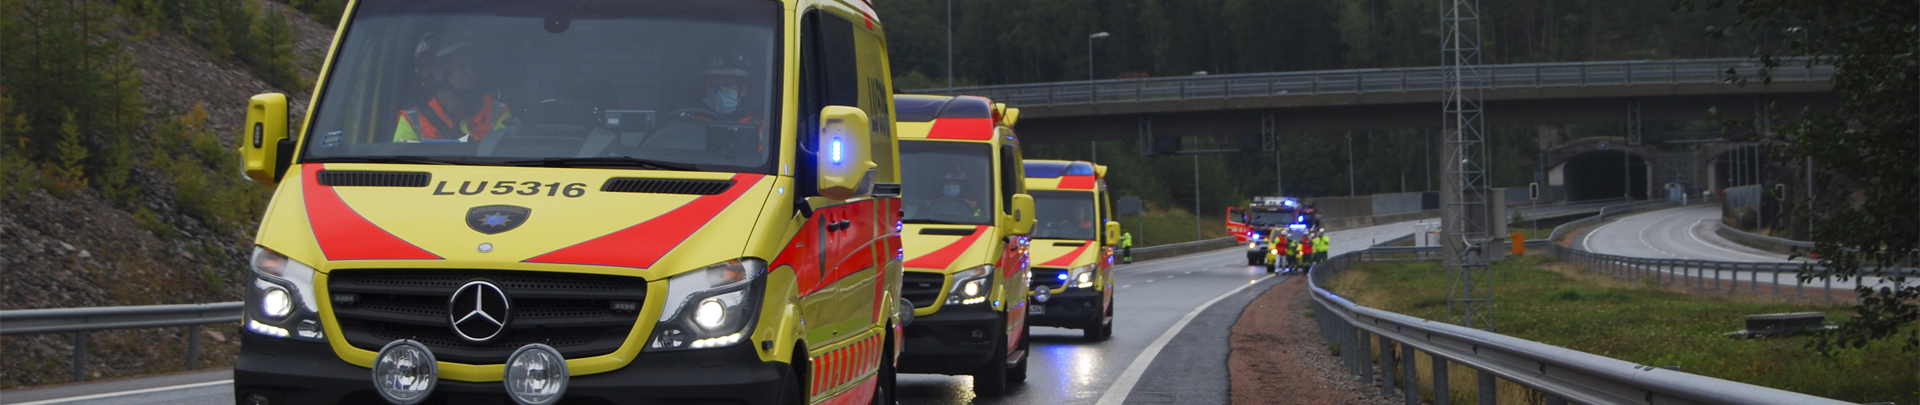 Ambulances queuing on the road.